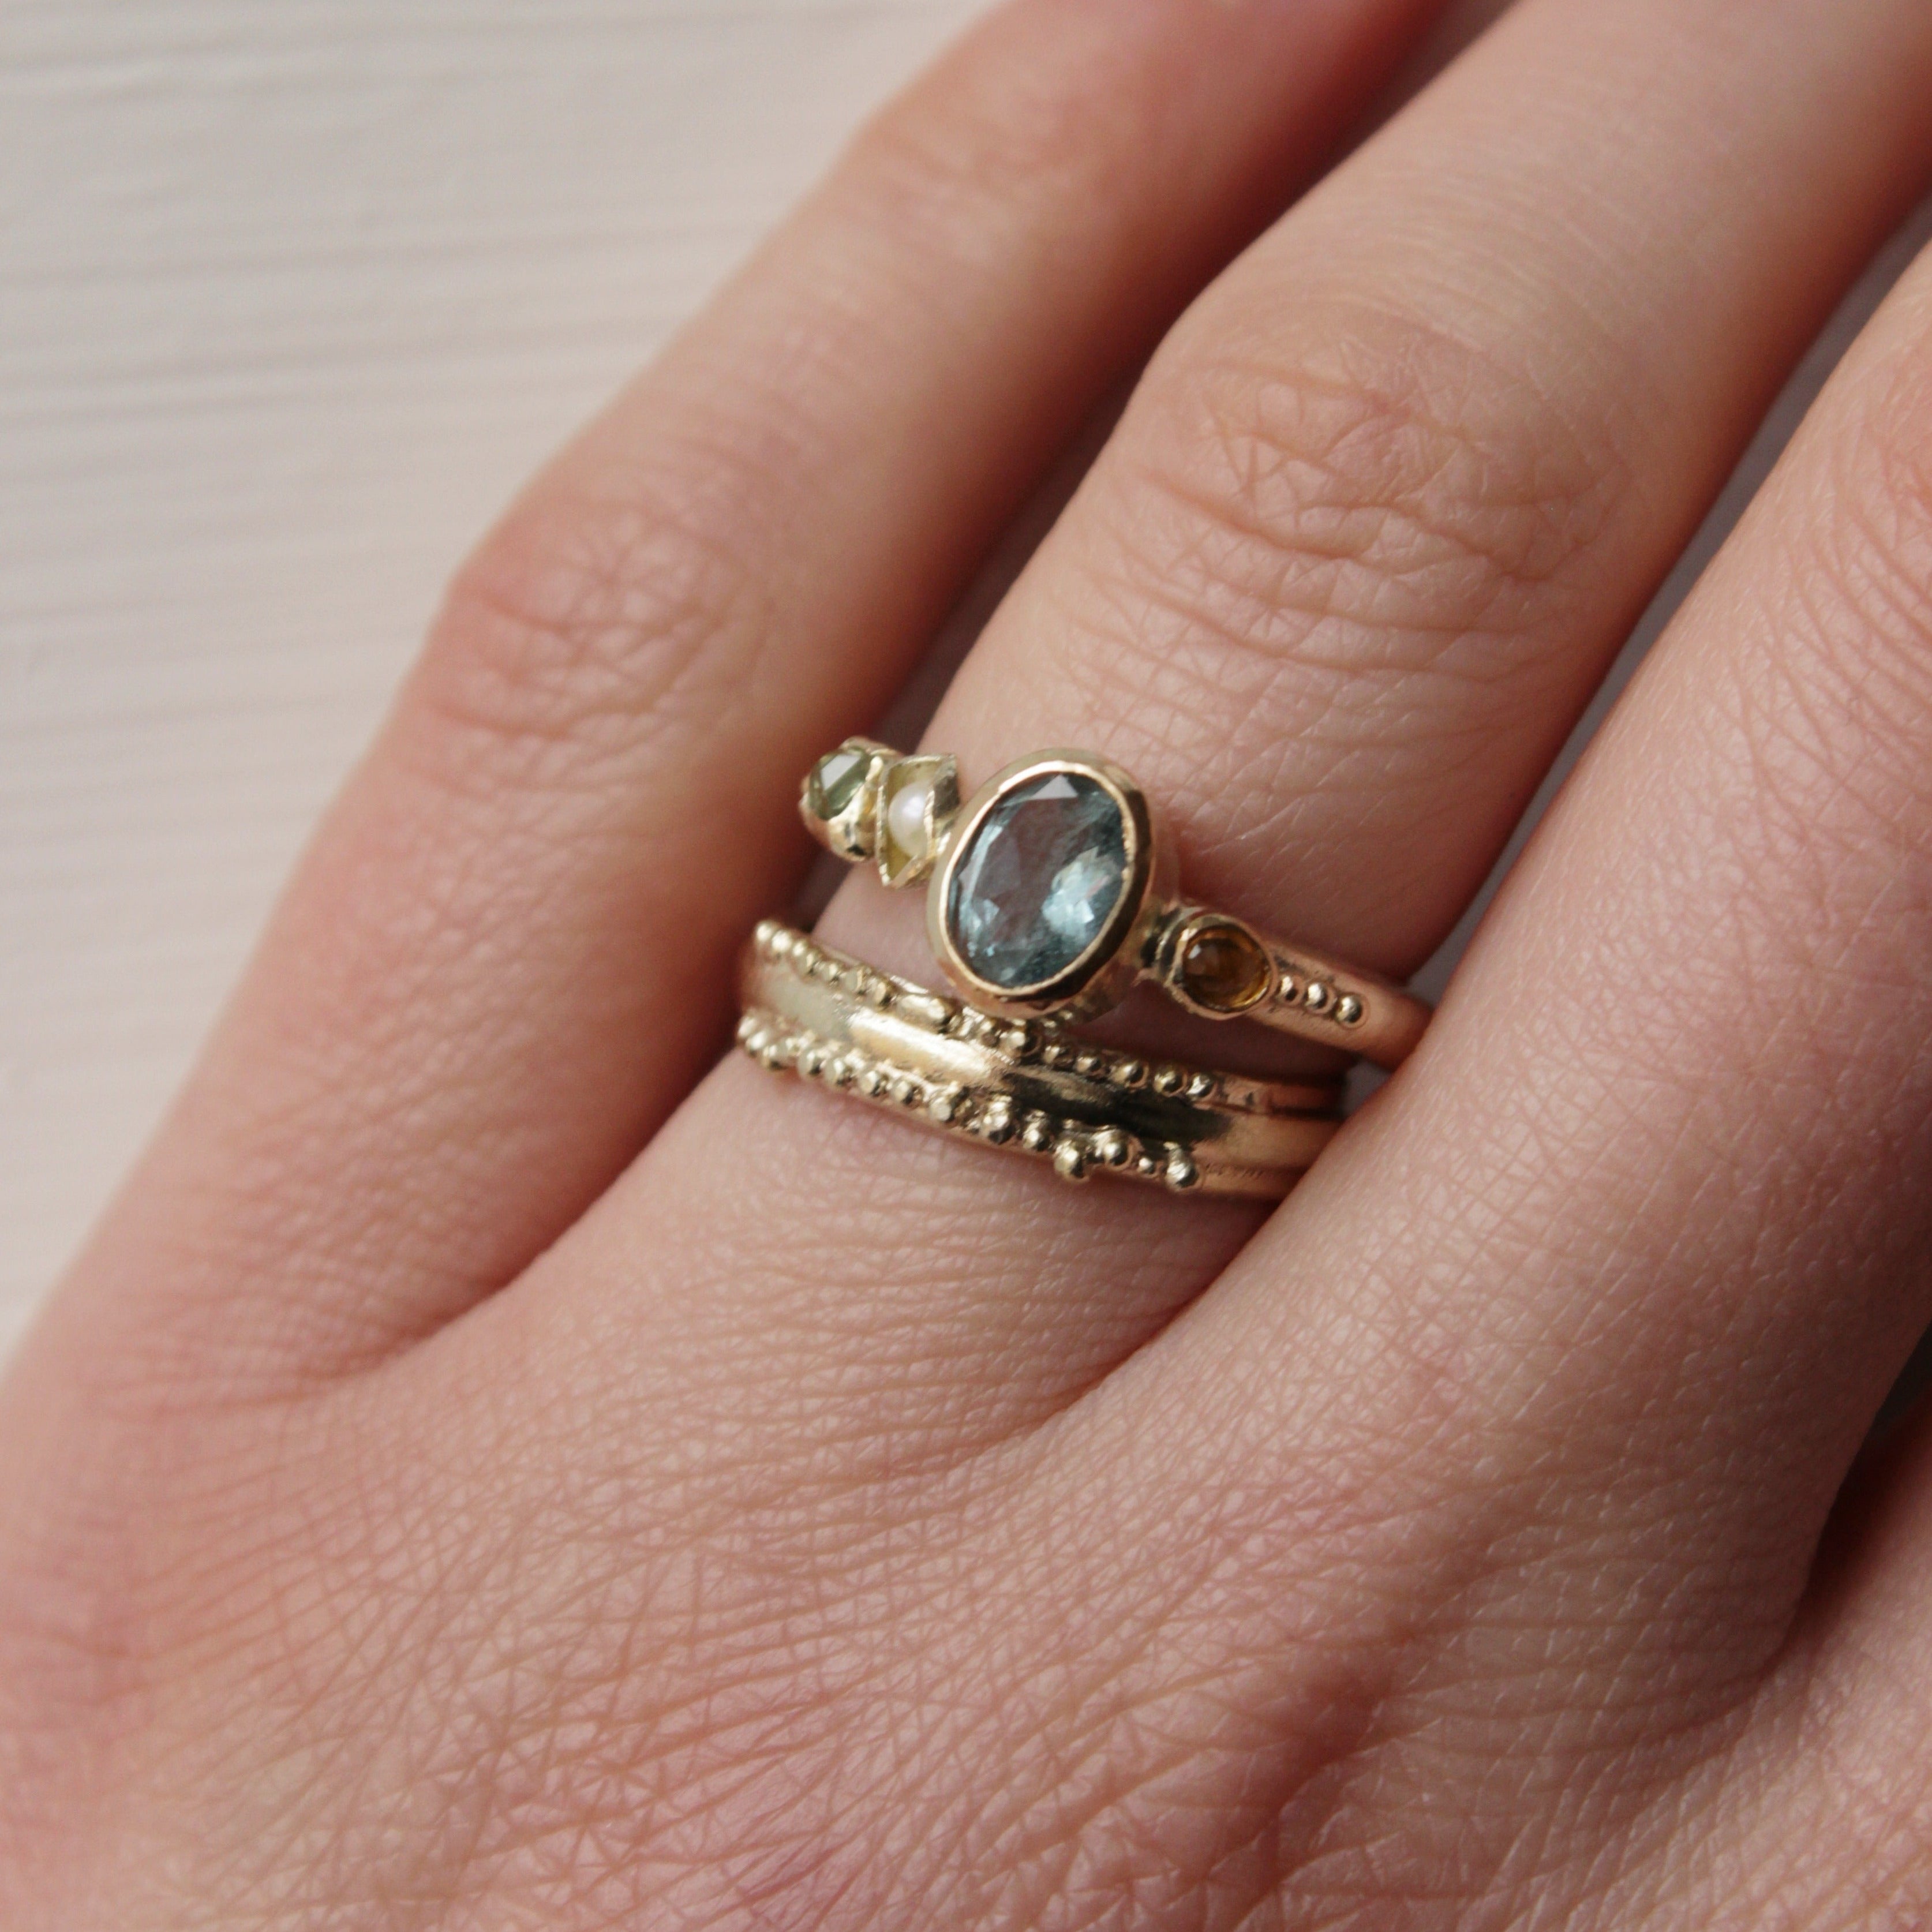 This stunning wedding ring is perfect for the alternative bride looking for an extra special wedding band. Inspired by ancestral metalsmithing techniques, this ring featured delicate granulation details that capture the light beautifully. Worn with the aquamarine engagement ring.